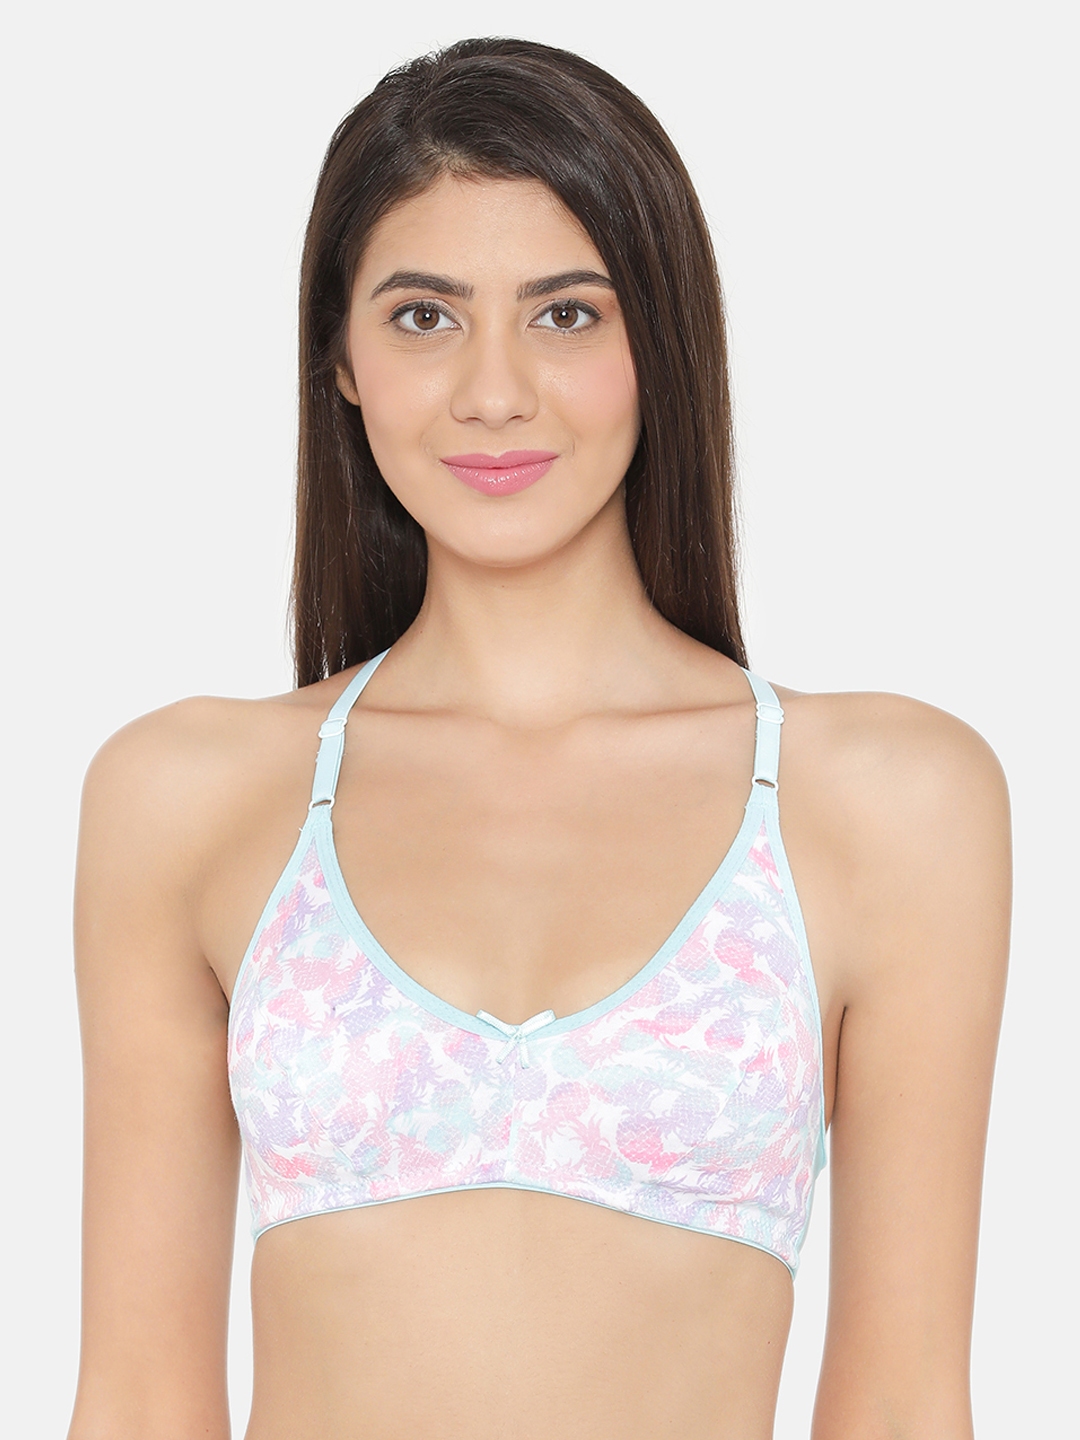 Buy Enamor Cotton Rich Padded Non Wired Racerback Multiway Bra at